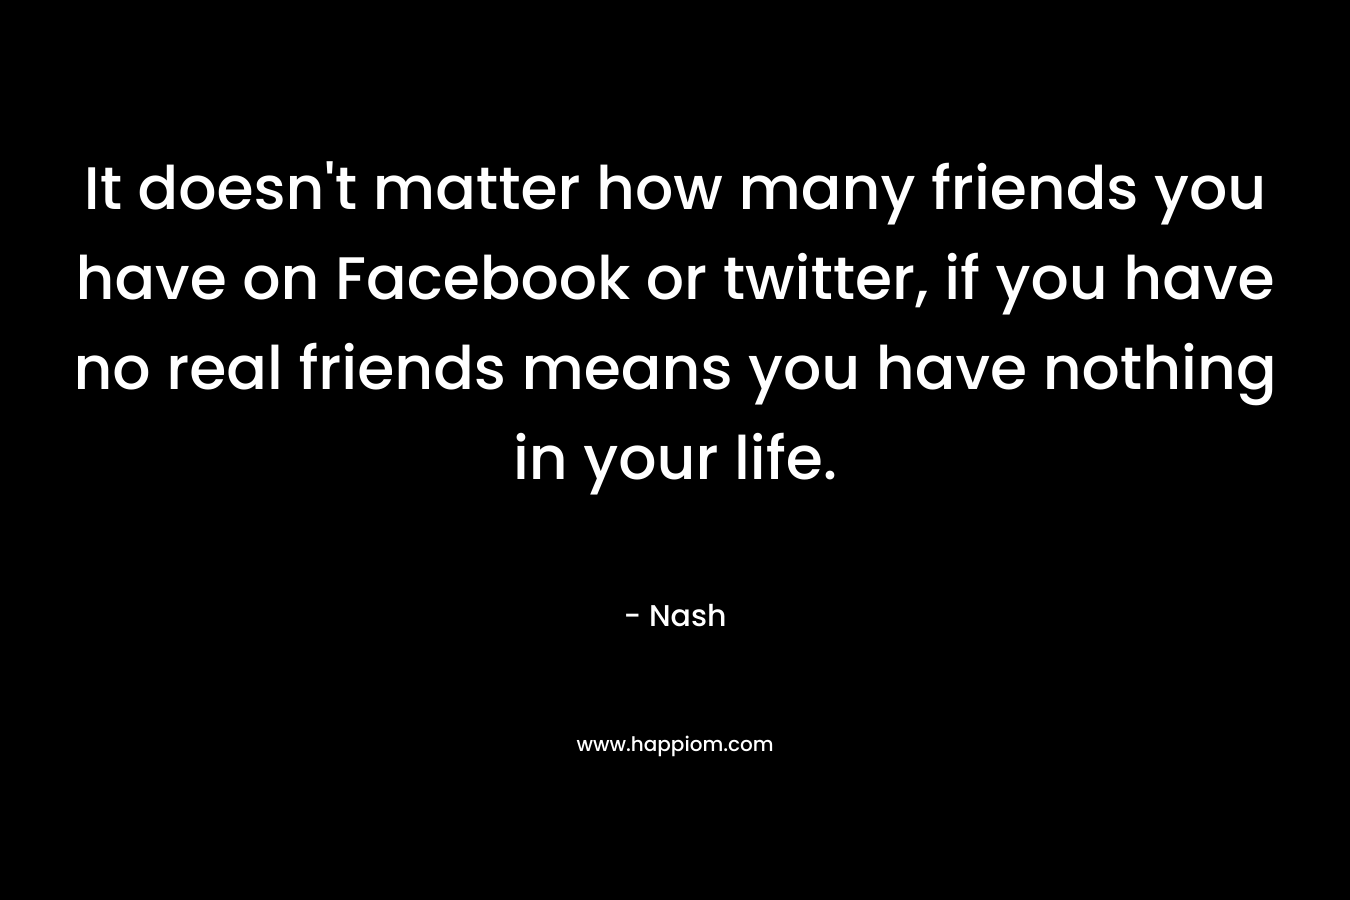 It doesn’t matter how many friends you have on Facebook or twitter, if you have no real friends means you have nothing in your life. – Nash